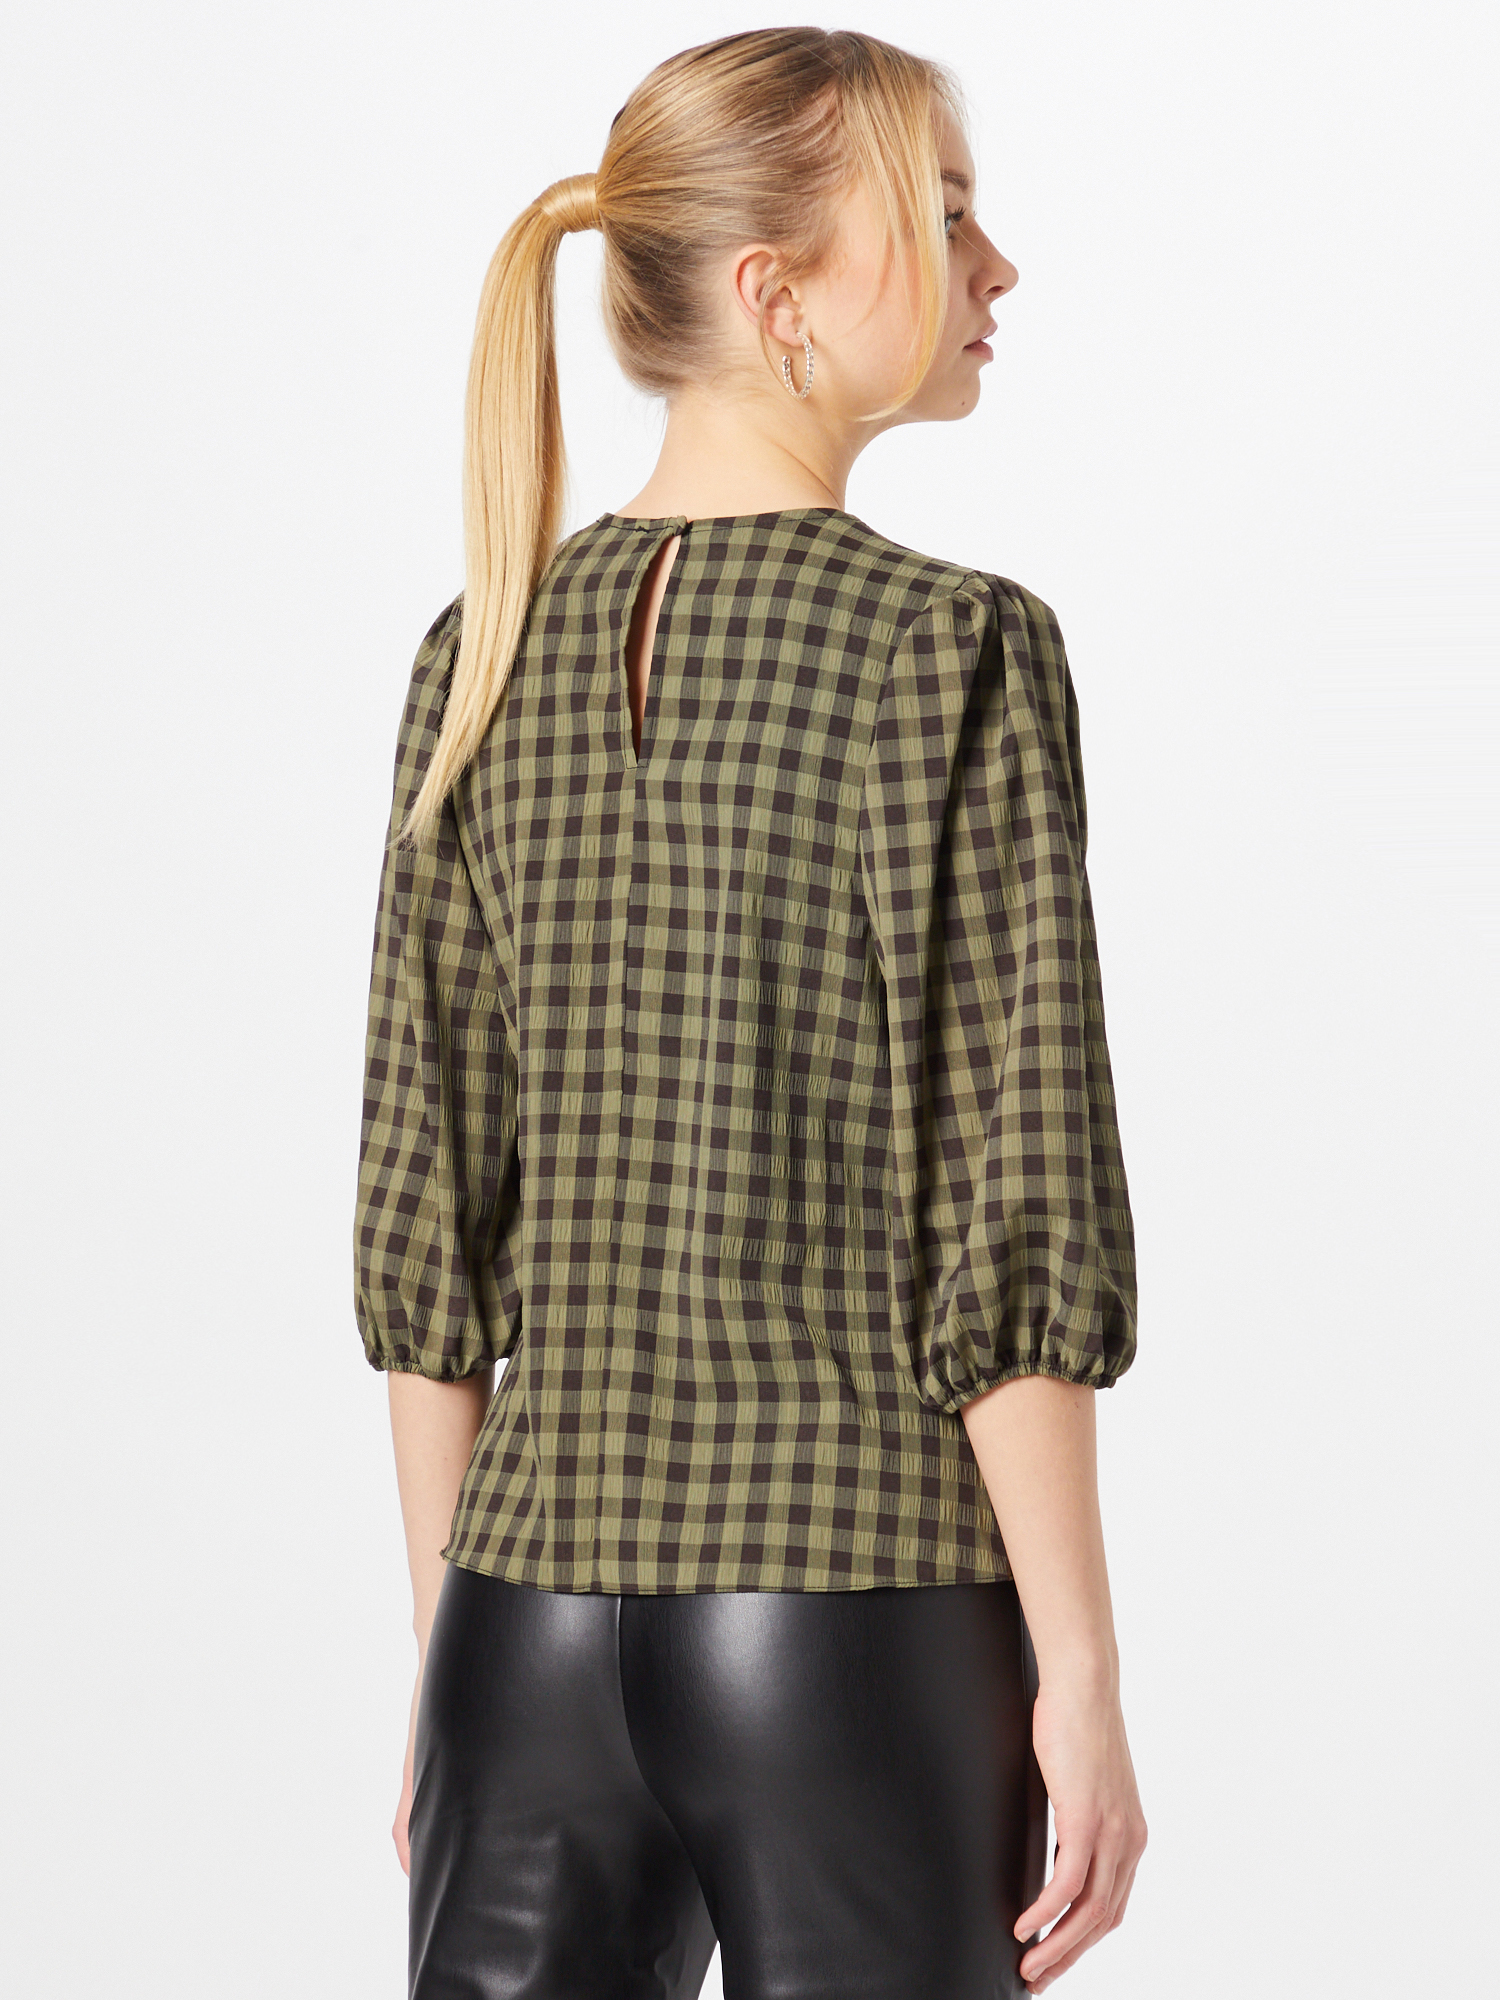 Oasis Bluse Gingham in Khaki 